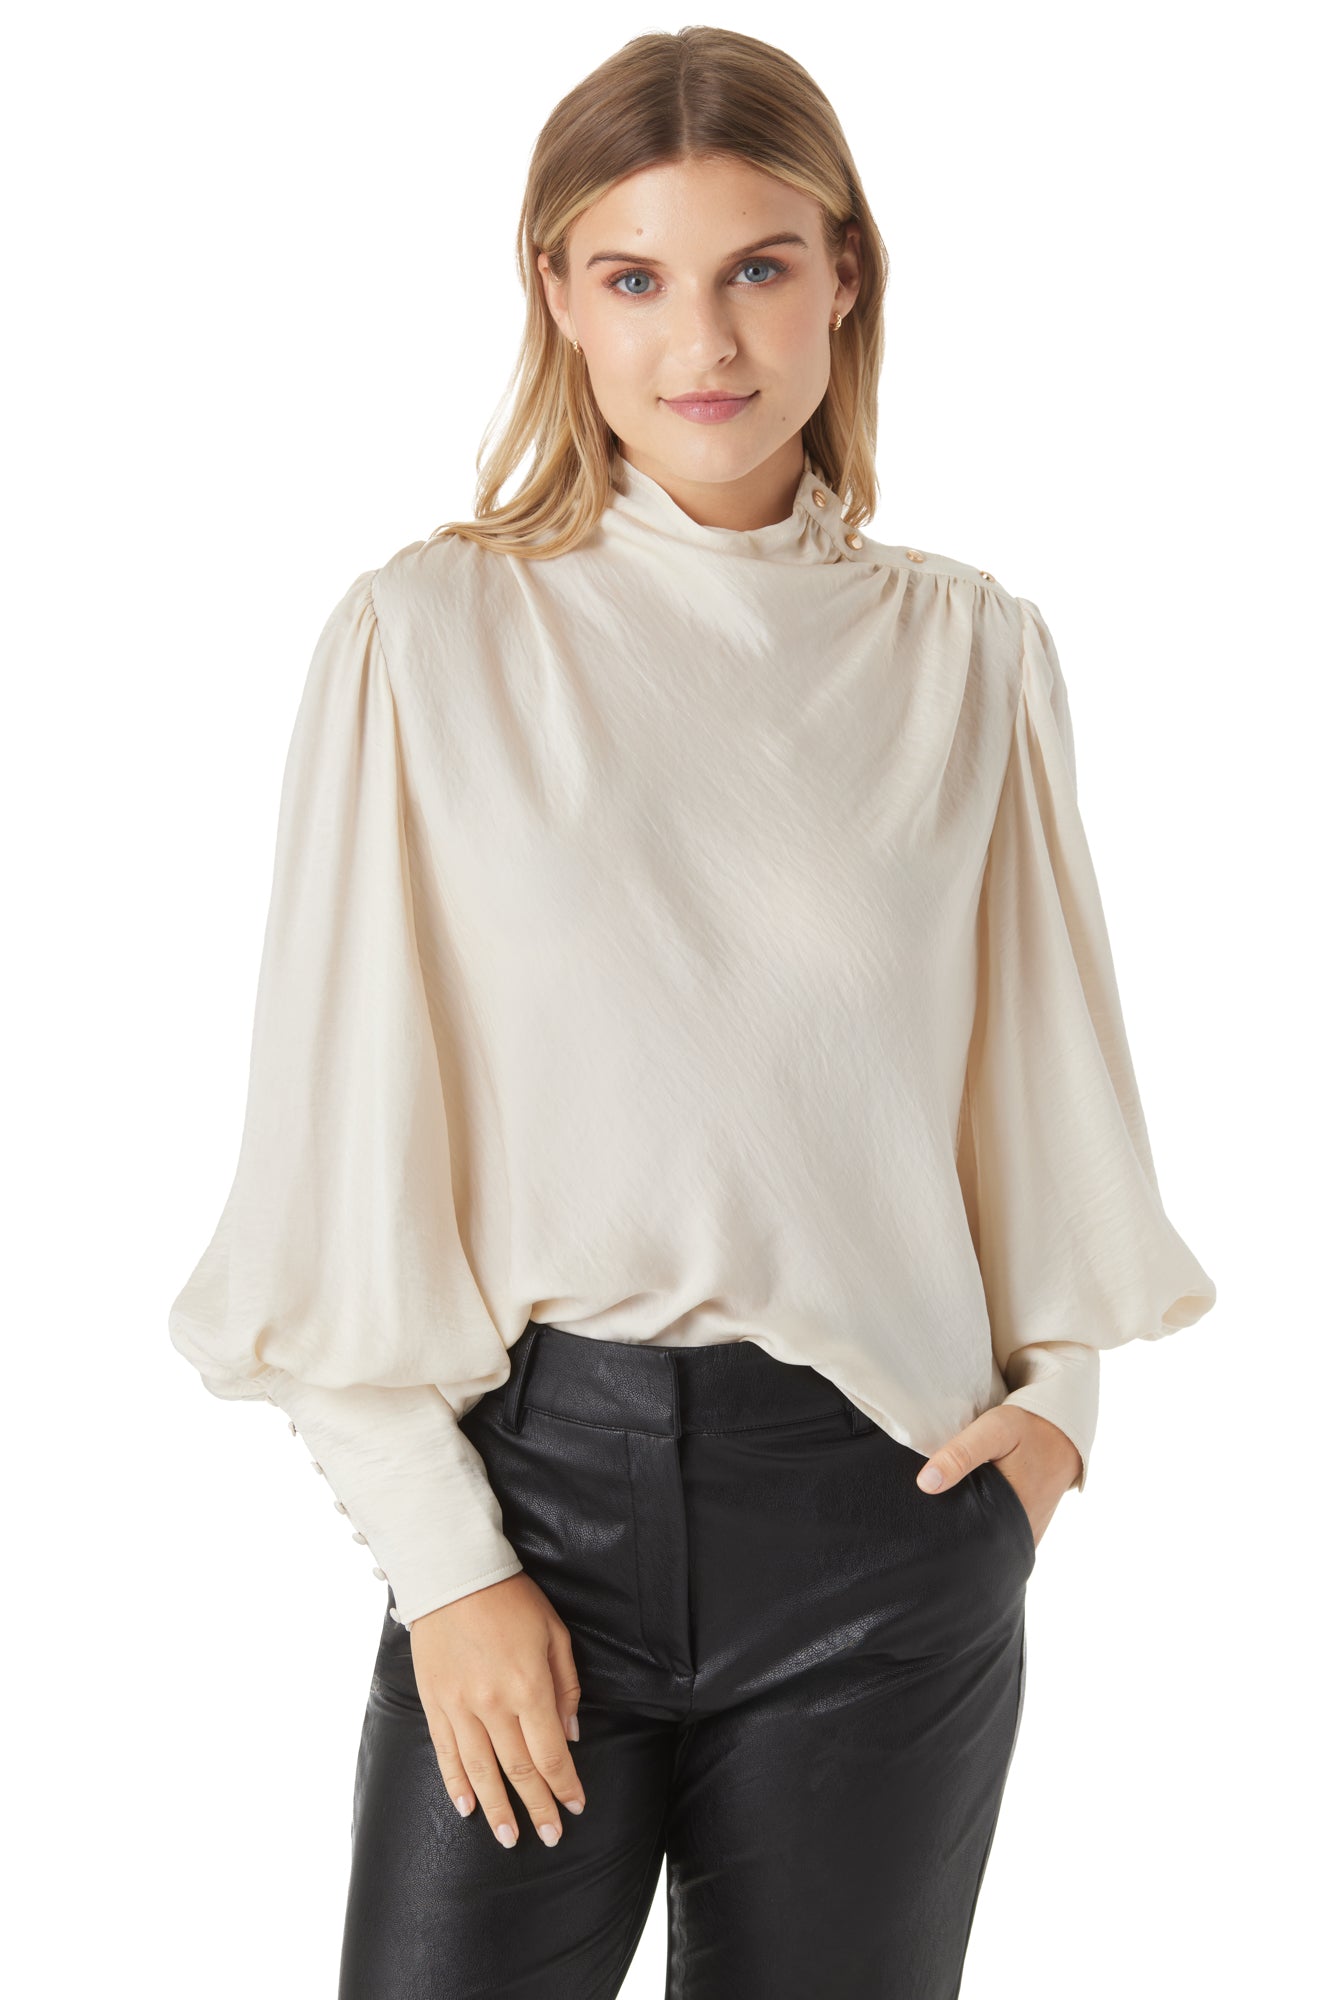 Florence Blouse in Ivory | CROSBY by Mollie Burch